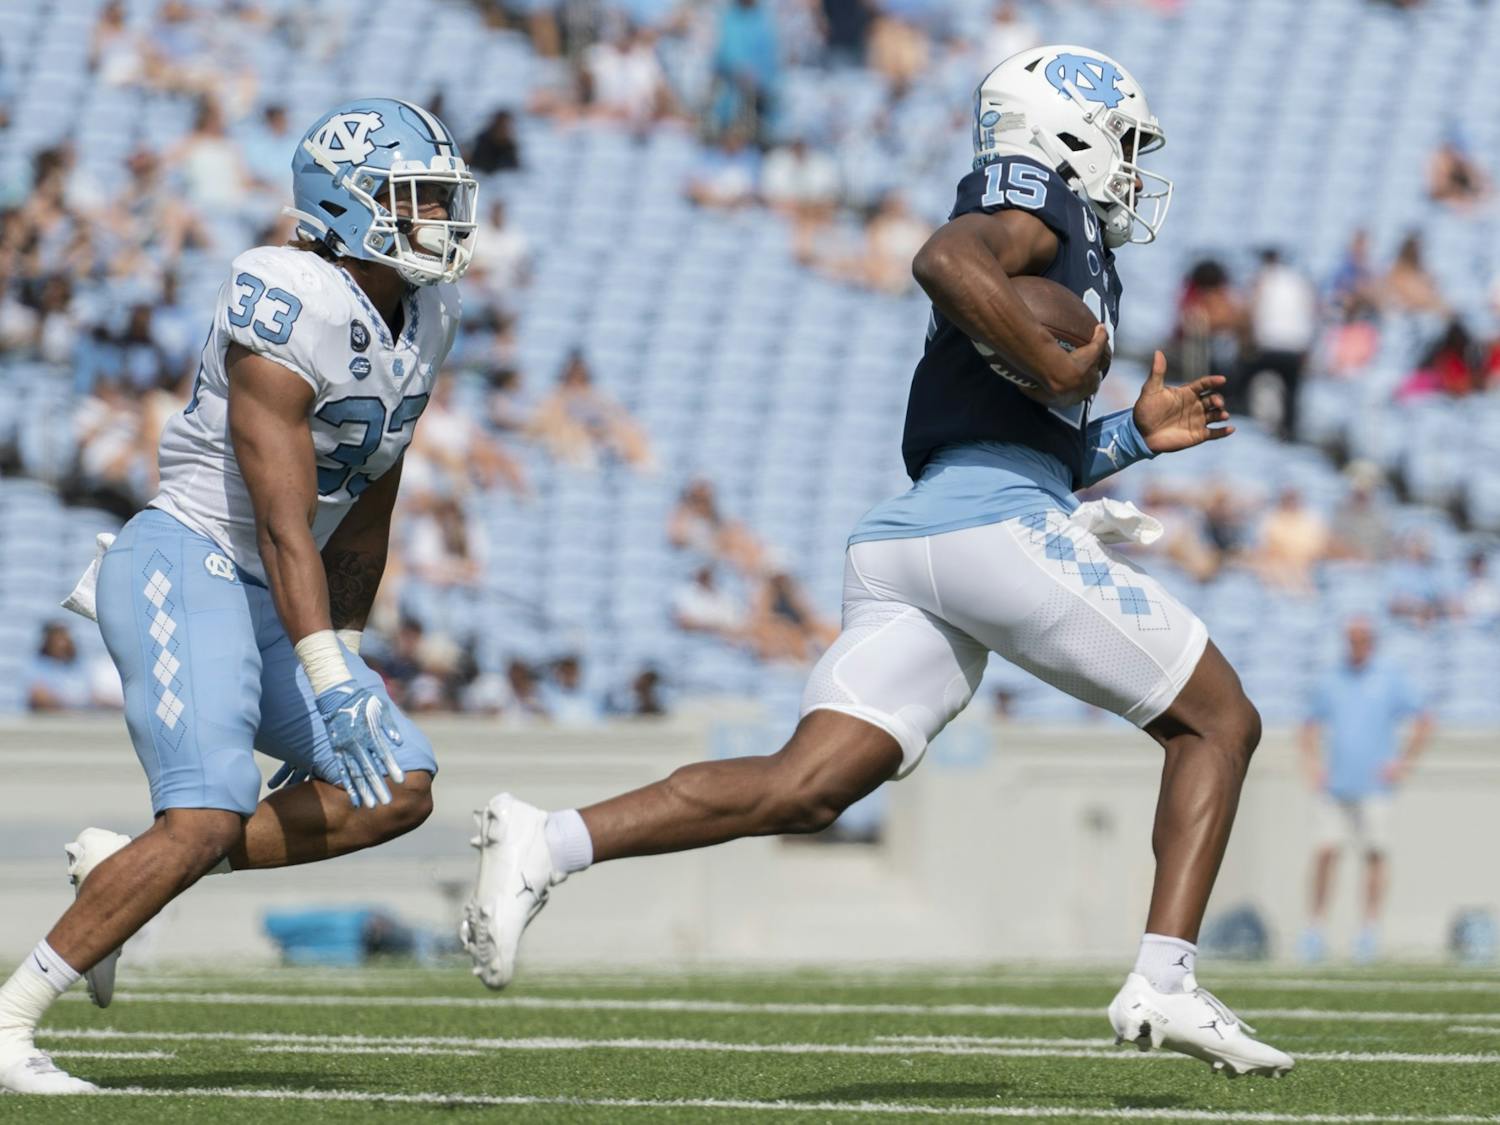 UNC senior linebacker Cedric Gray (33) chases after UNC first-year quarterback Connor Harrell (15) as he runs down the line during the Spring Game in Kenan Stadium at on Saturday, April 15, 2023.&nbsp;